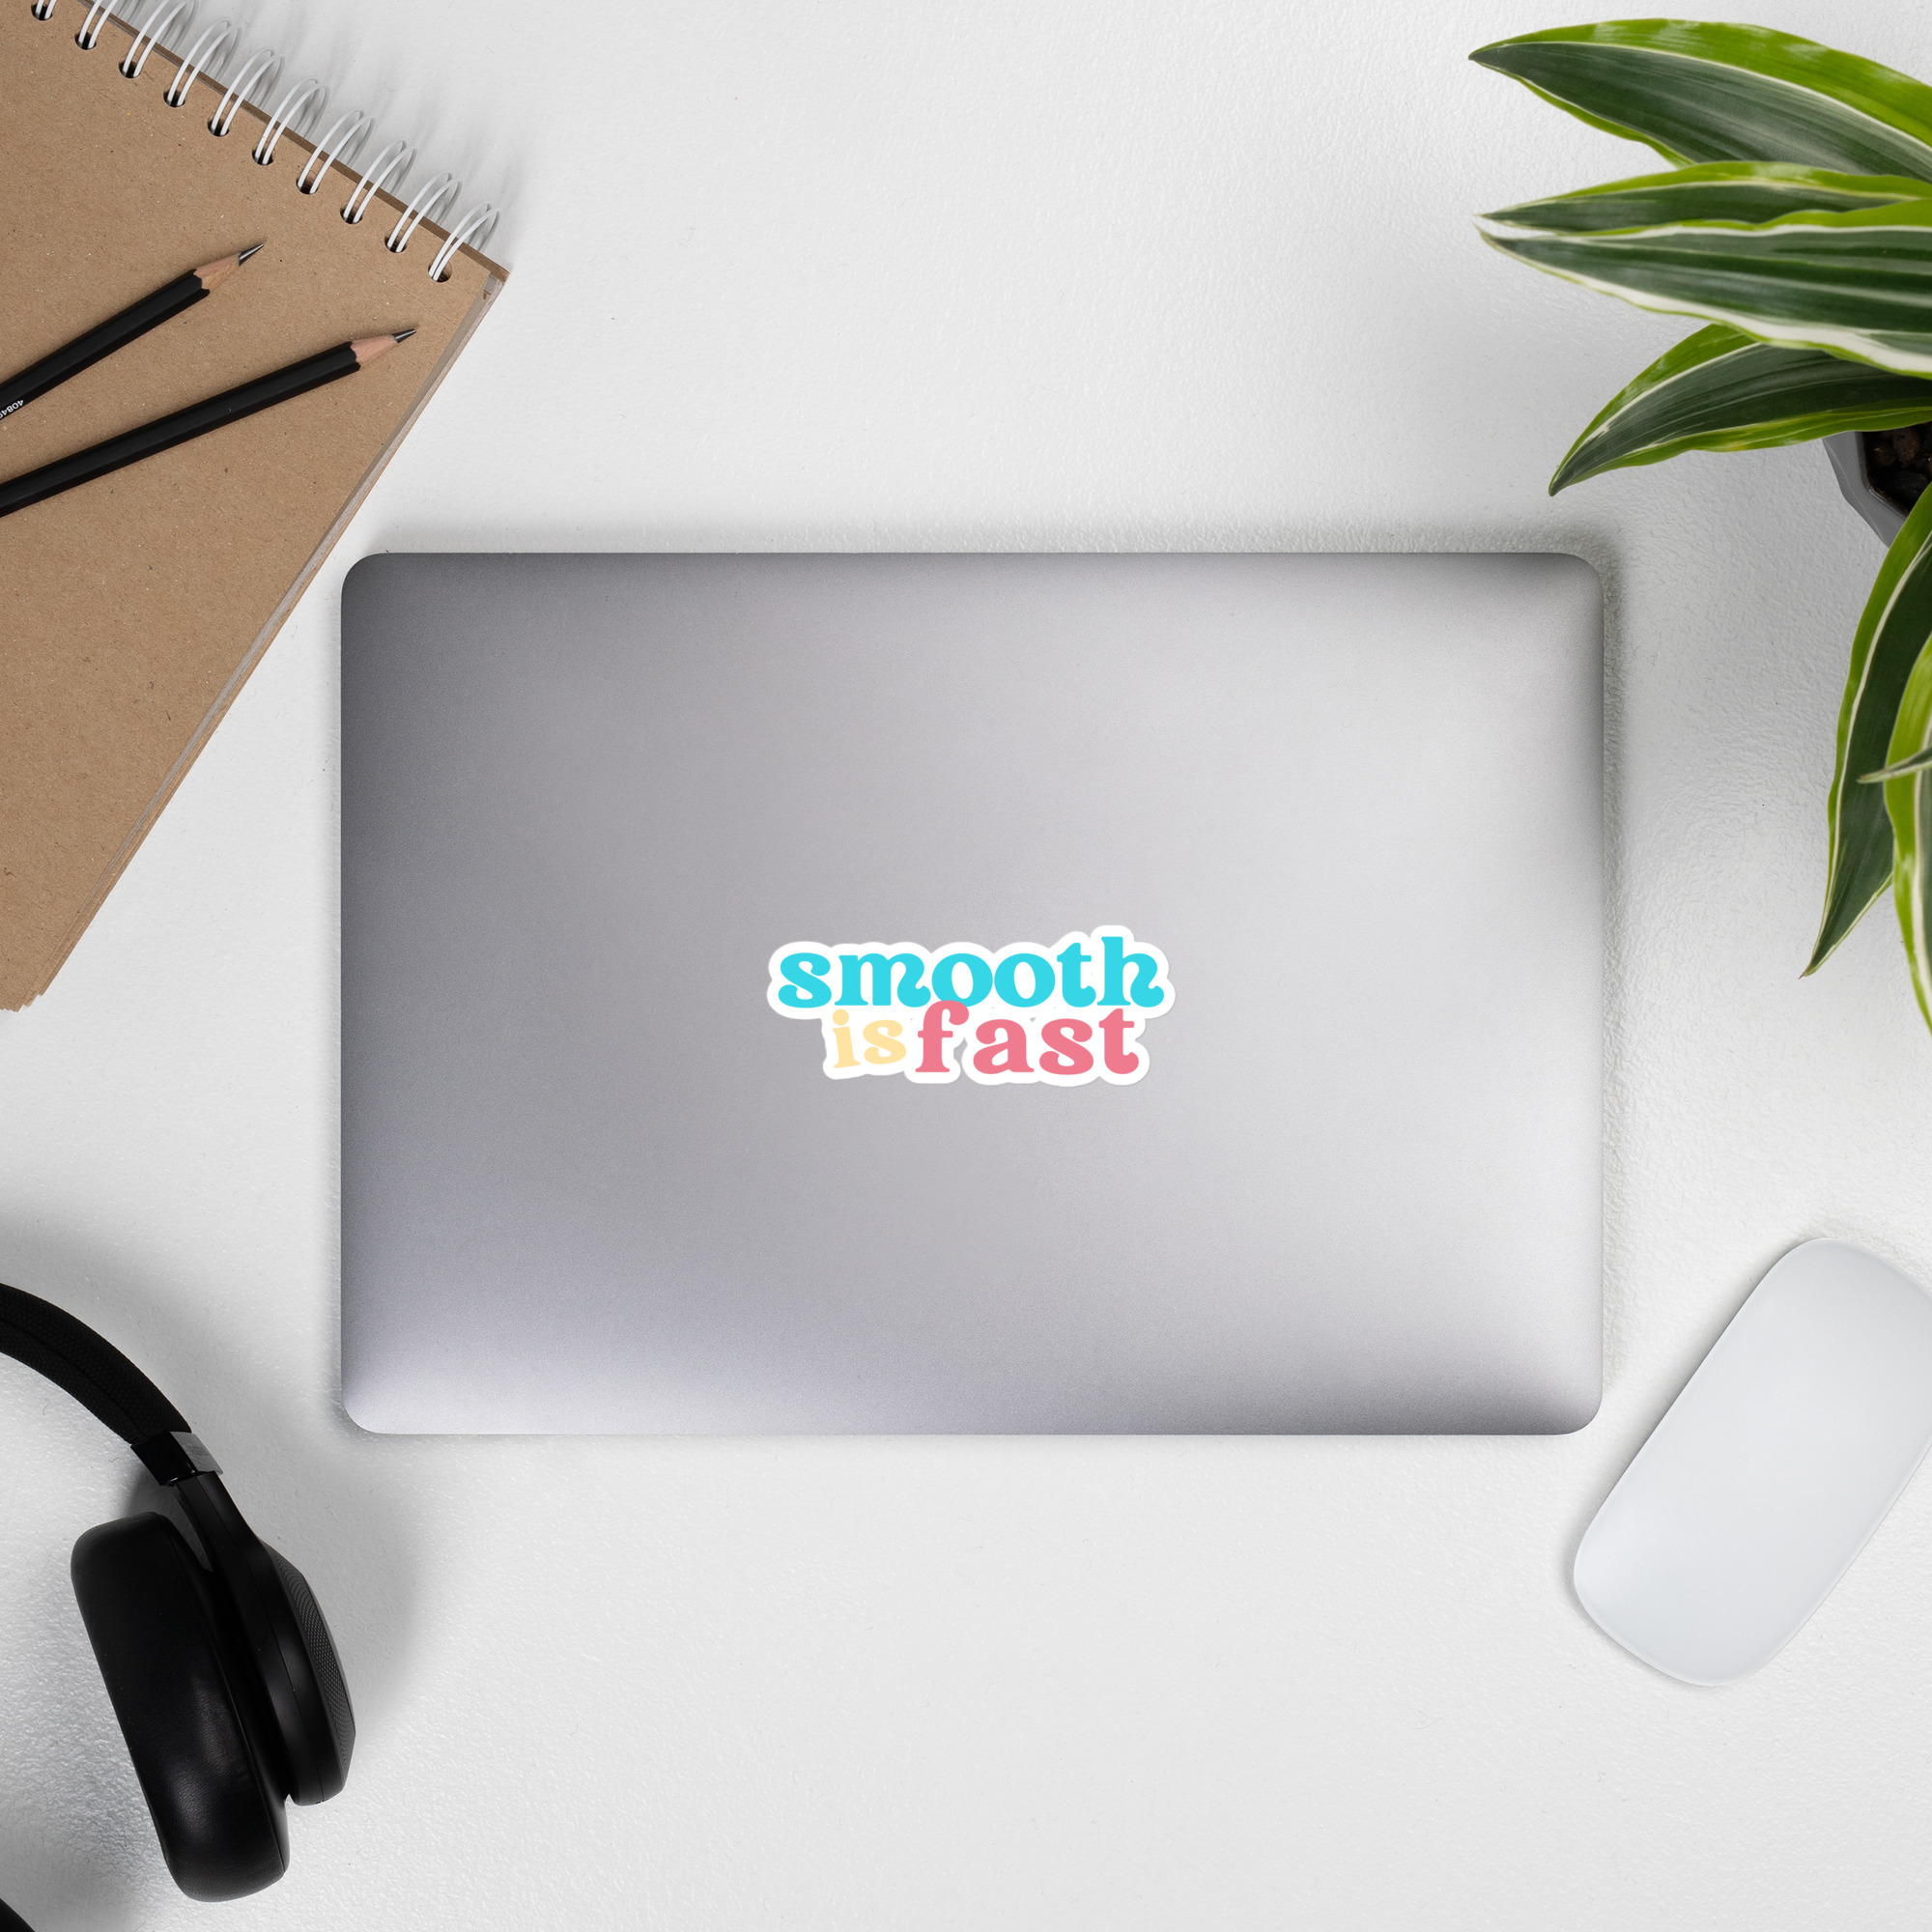 Smooth is Fast Sticker